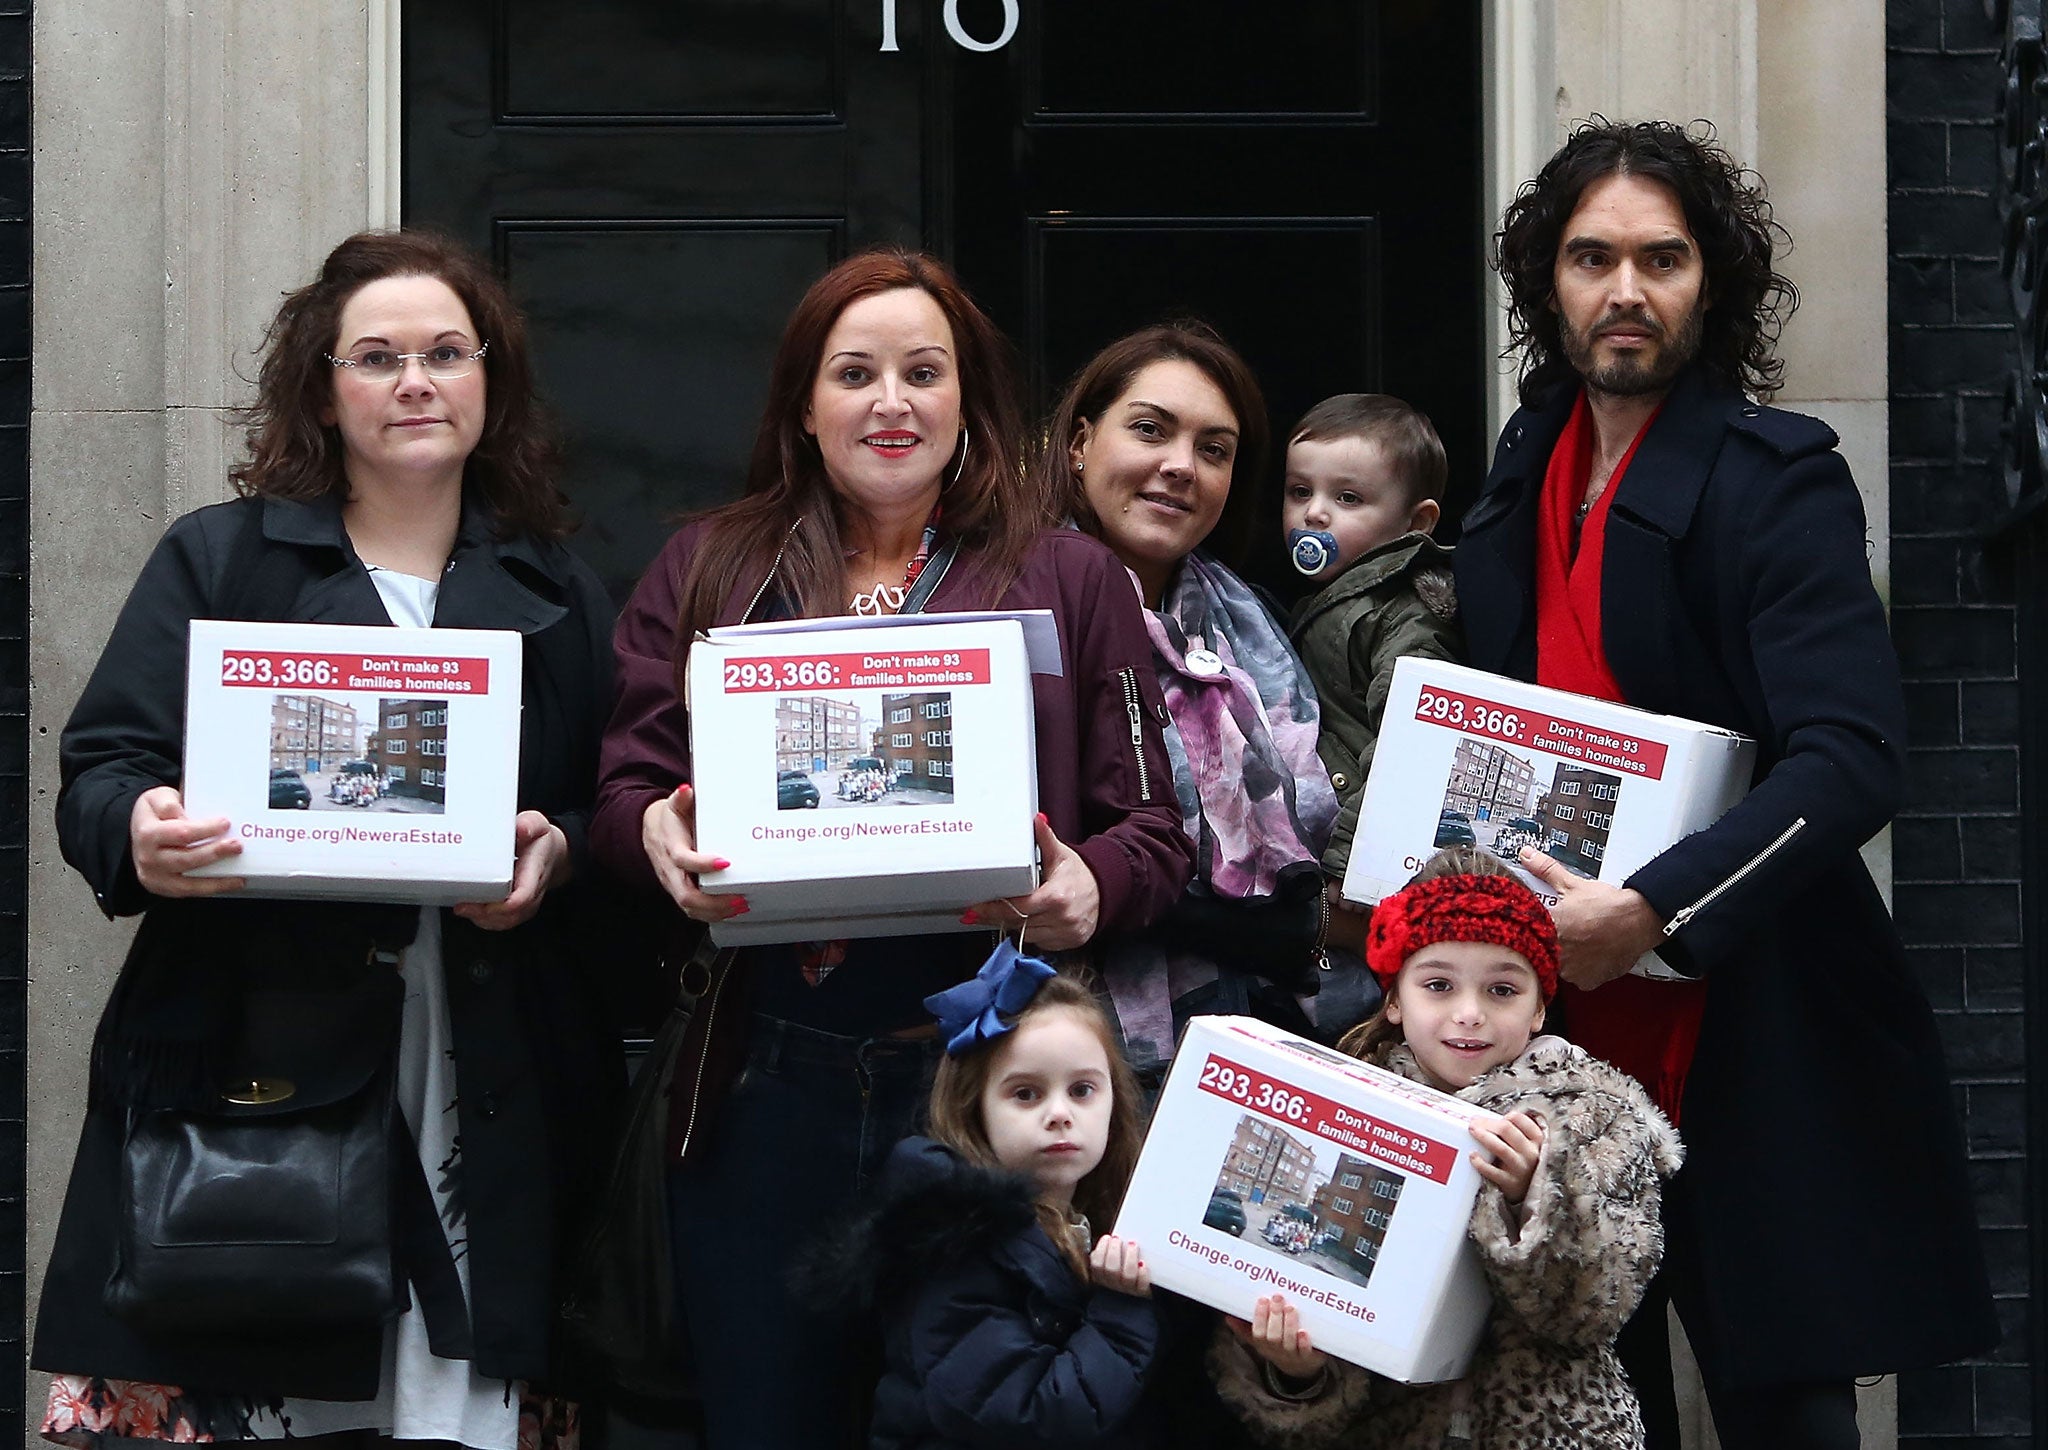 Russell Brand joins residents and supporters from the New Era housing estate in East London as they deliver a petition to 10 Downing Street